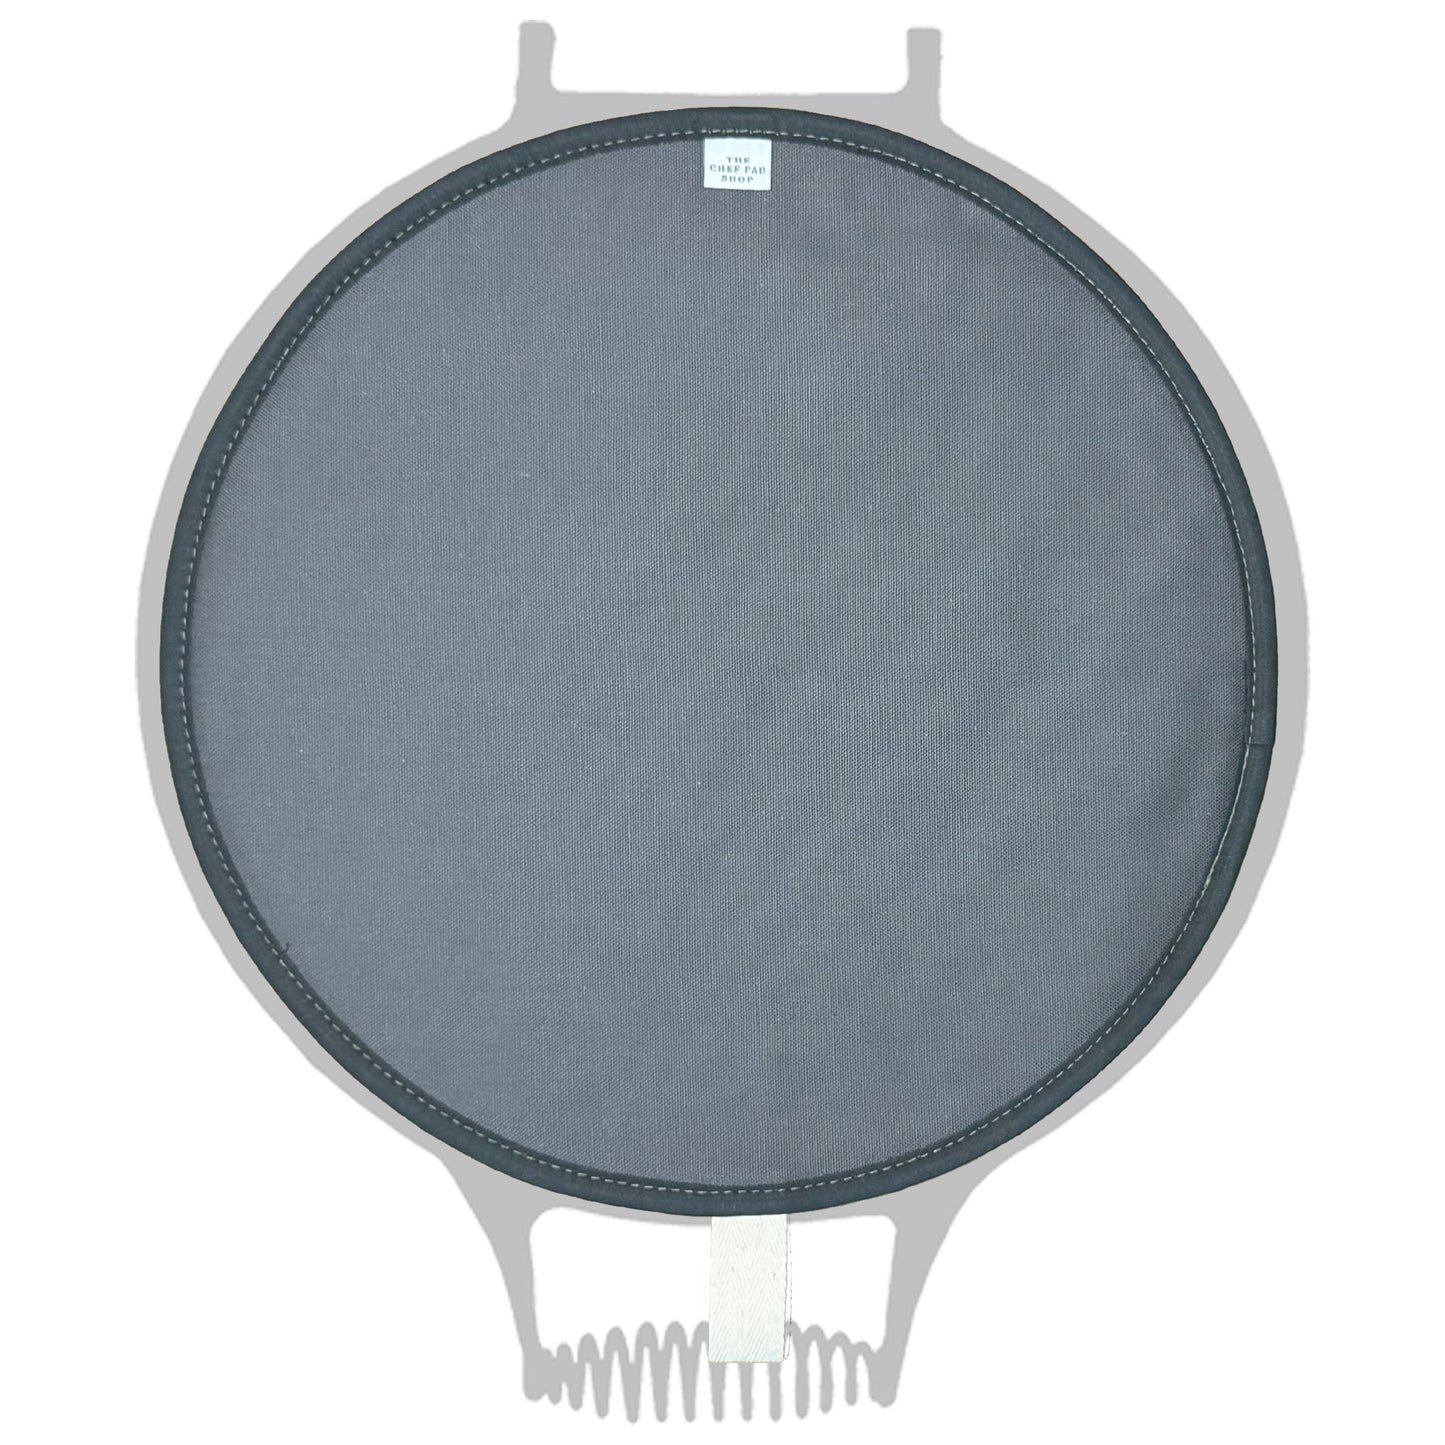 Dark Grey Plain Chefs Pad with Black Towelling for use with AGA range cooker